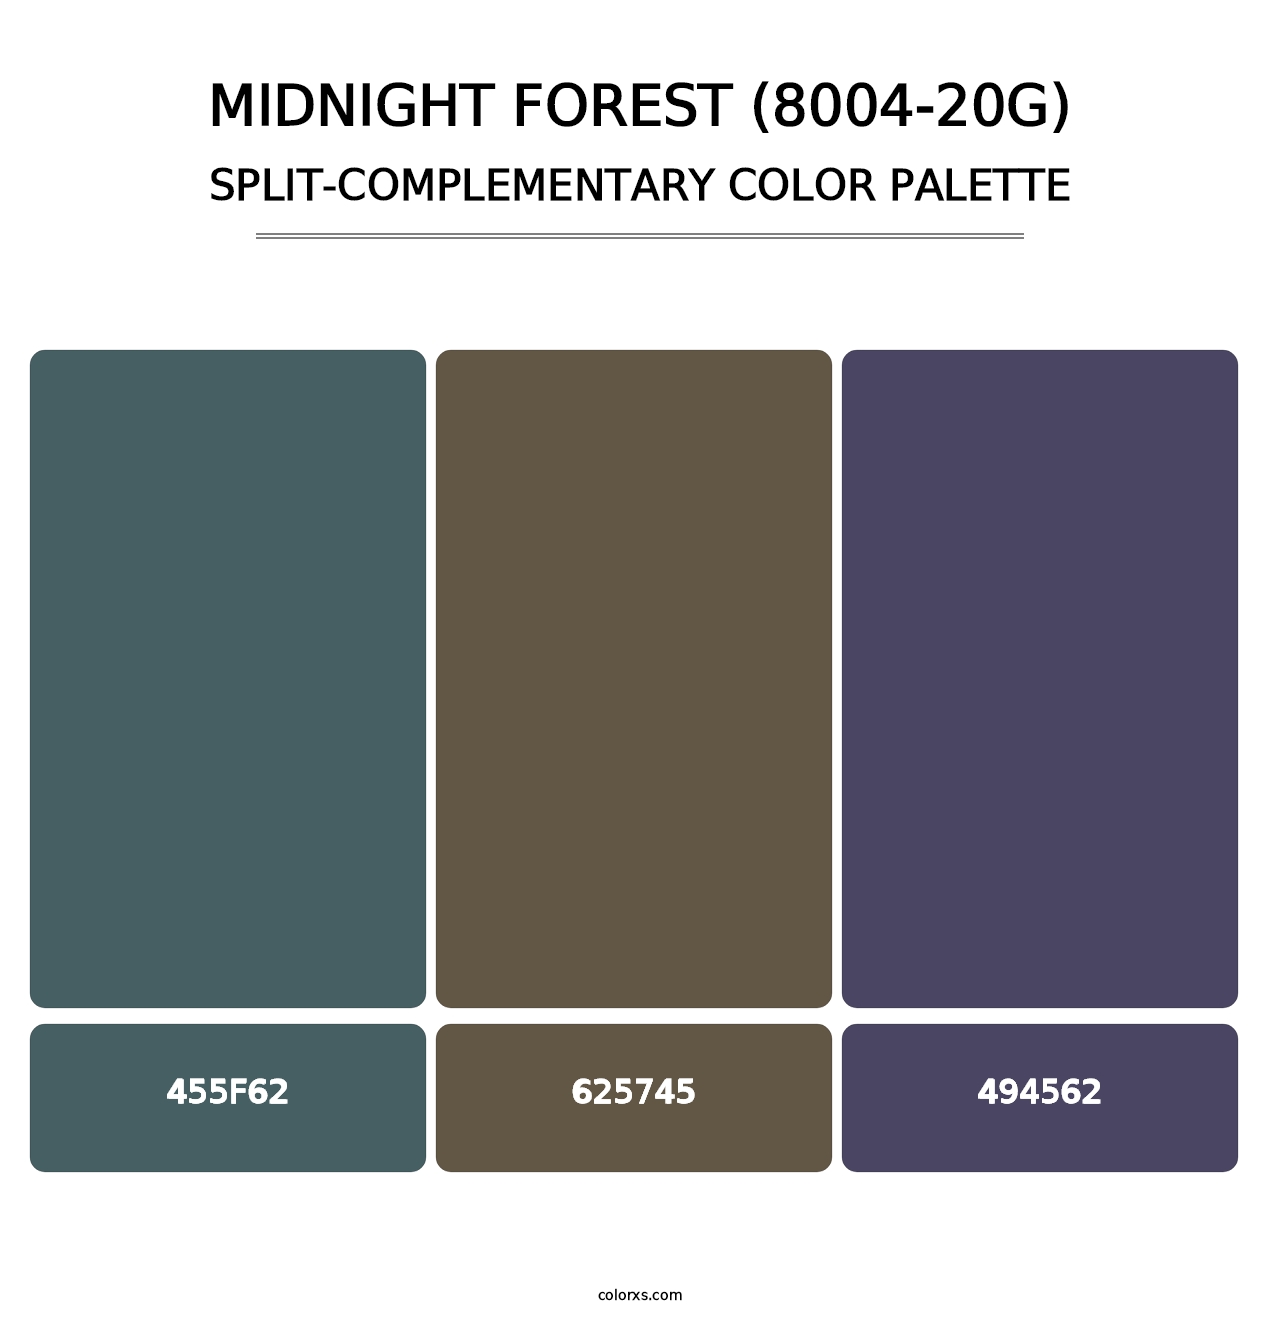 Midnight Forest (8004-20G) - Split-Complementary Color Palette